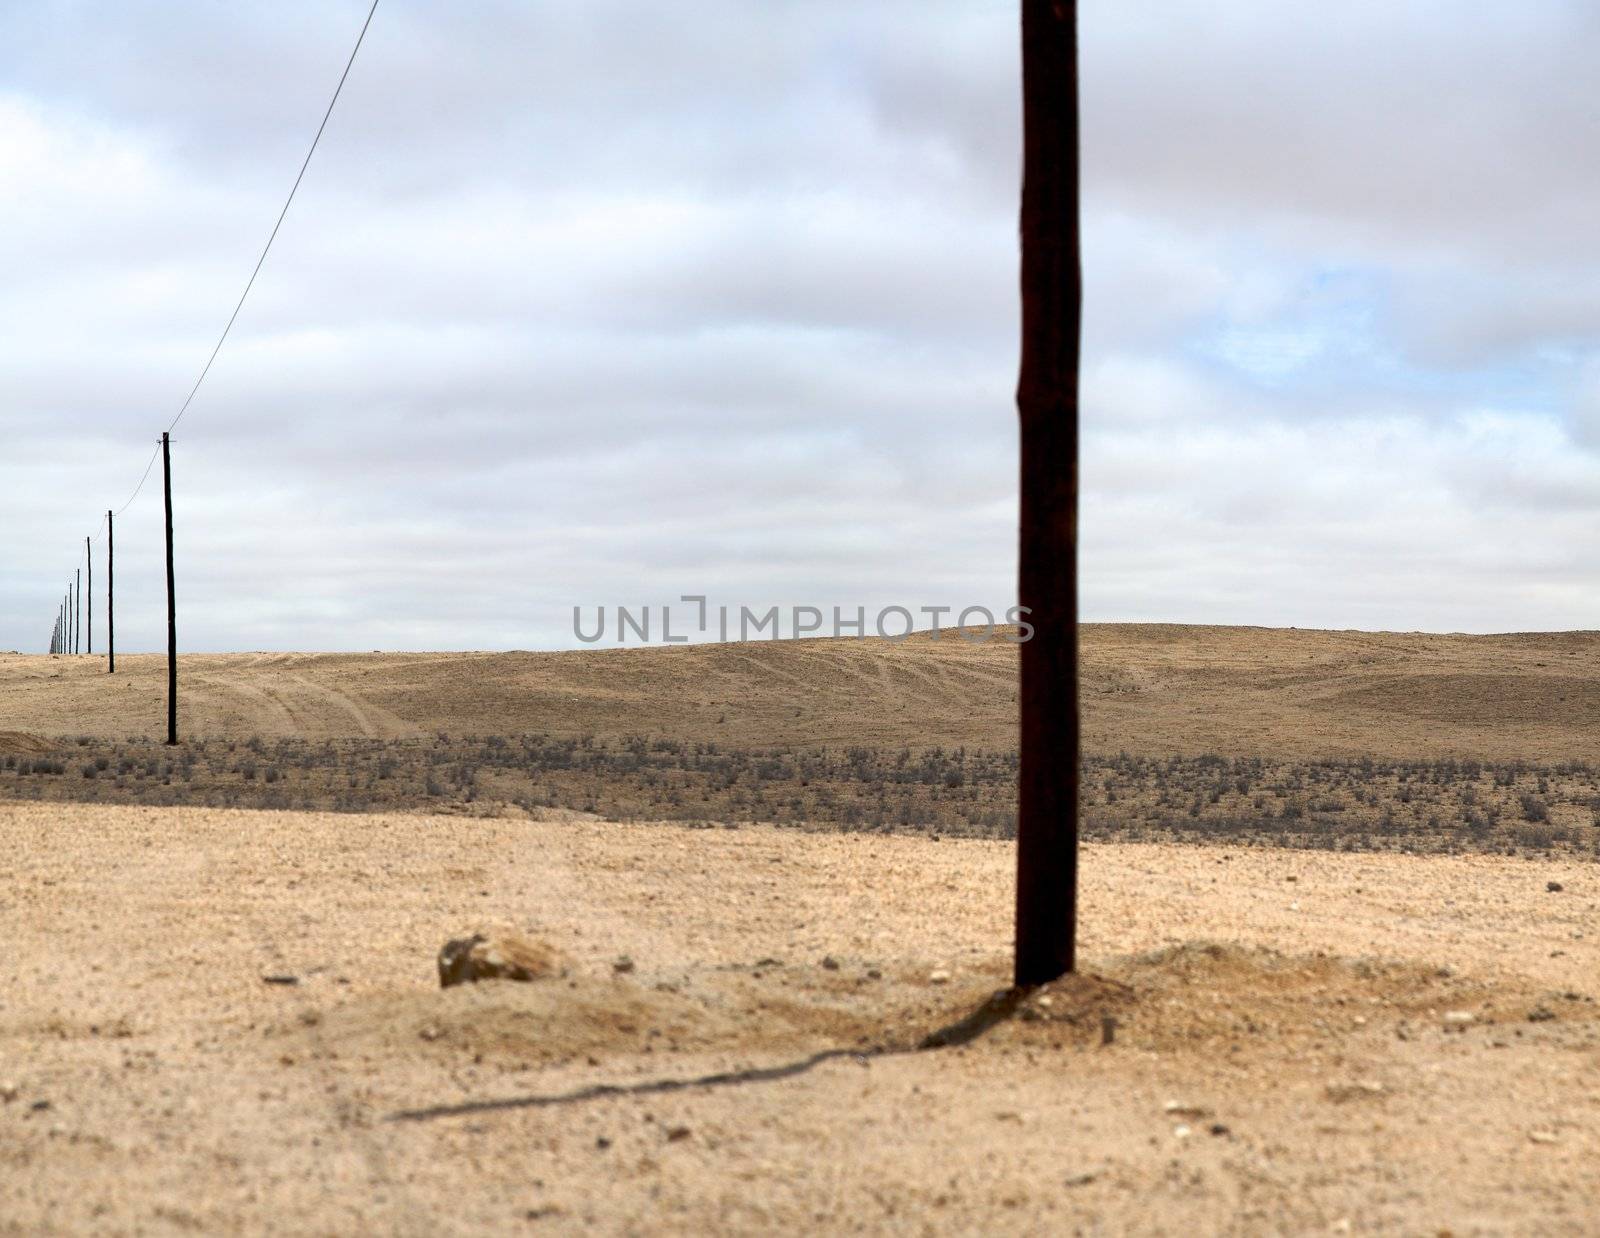 Arid and desolate landscape in Namibia on the way to Swakopmund